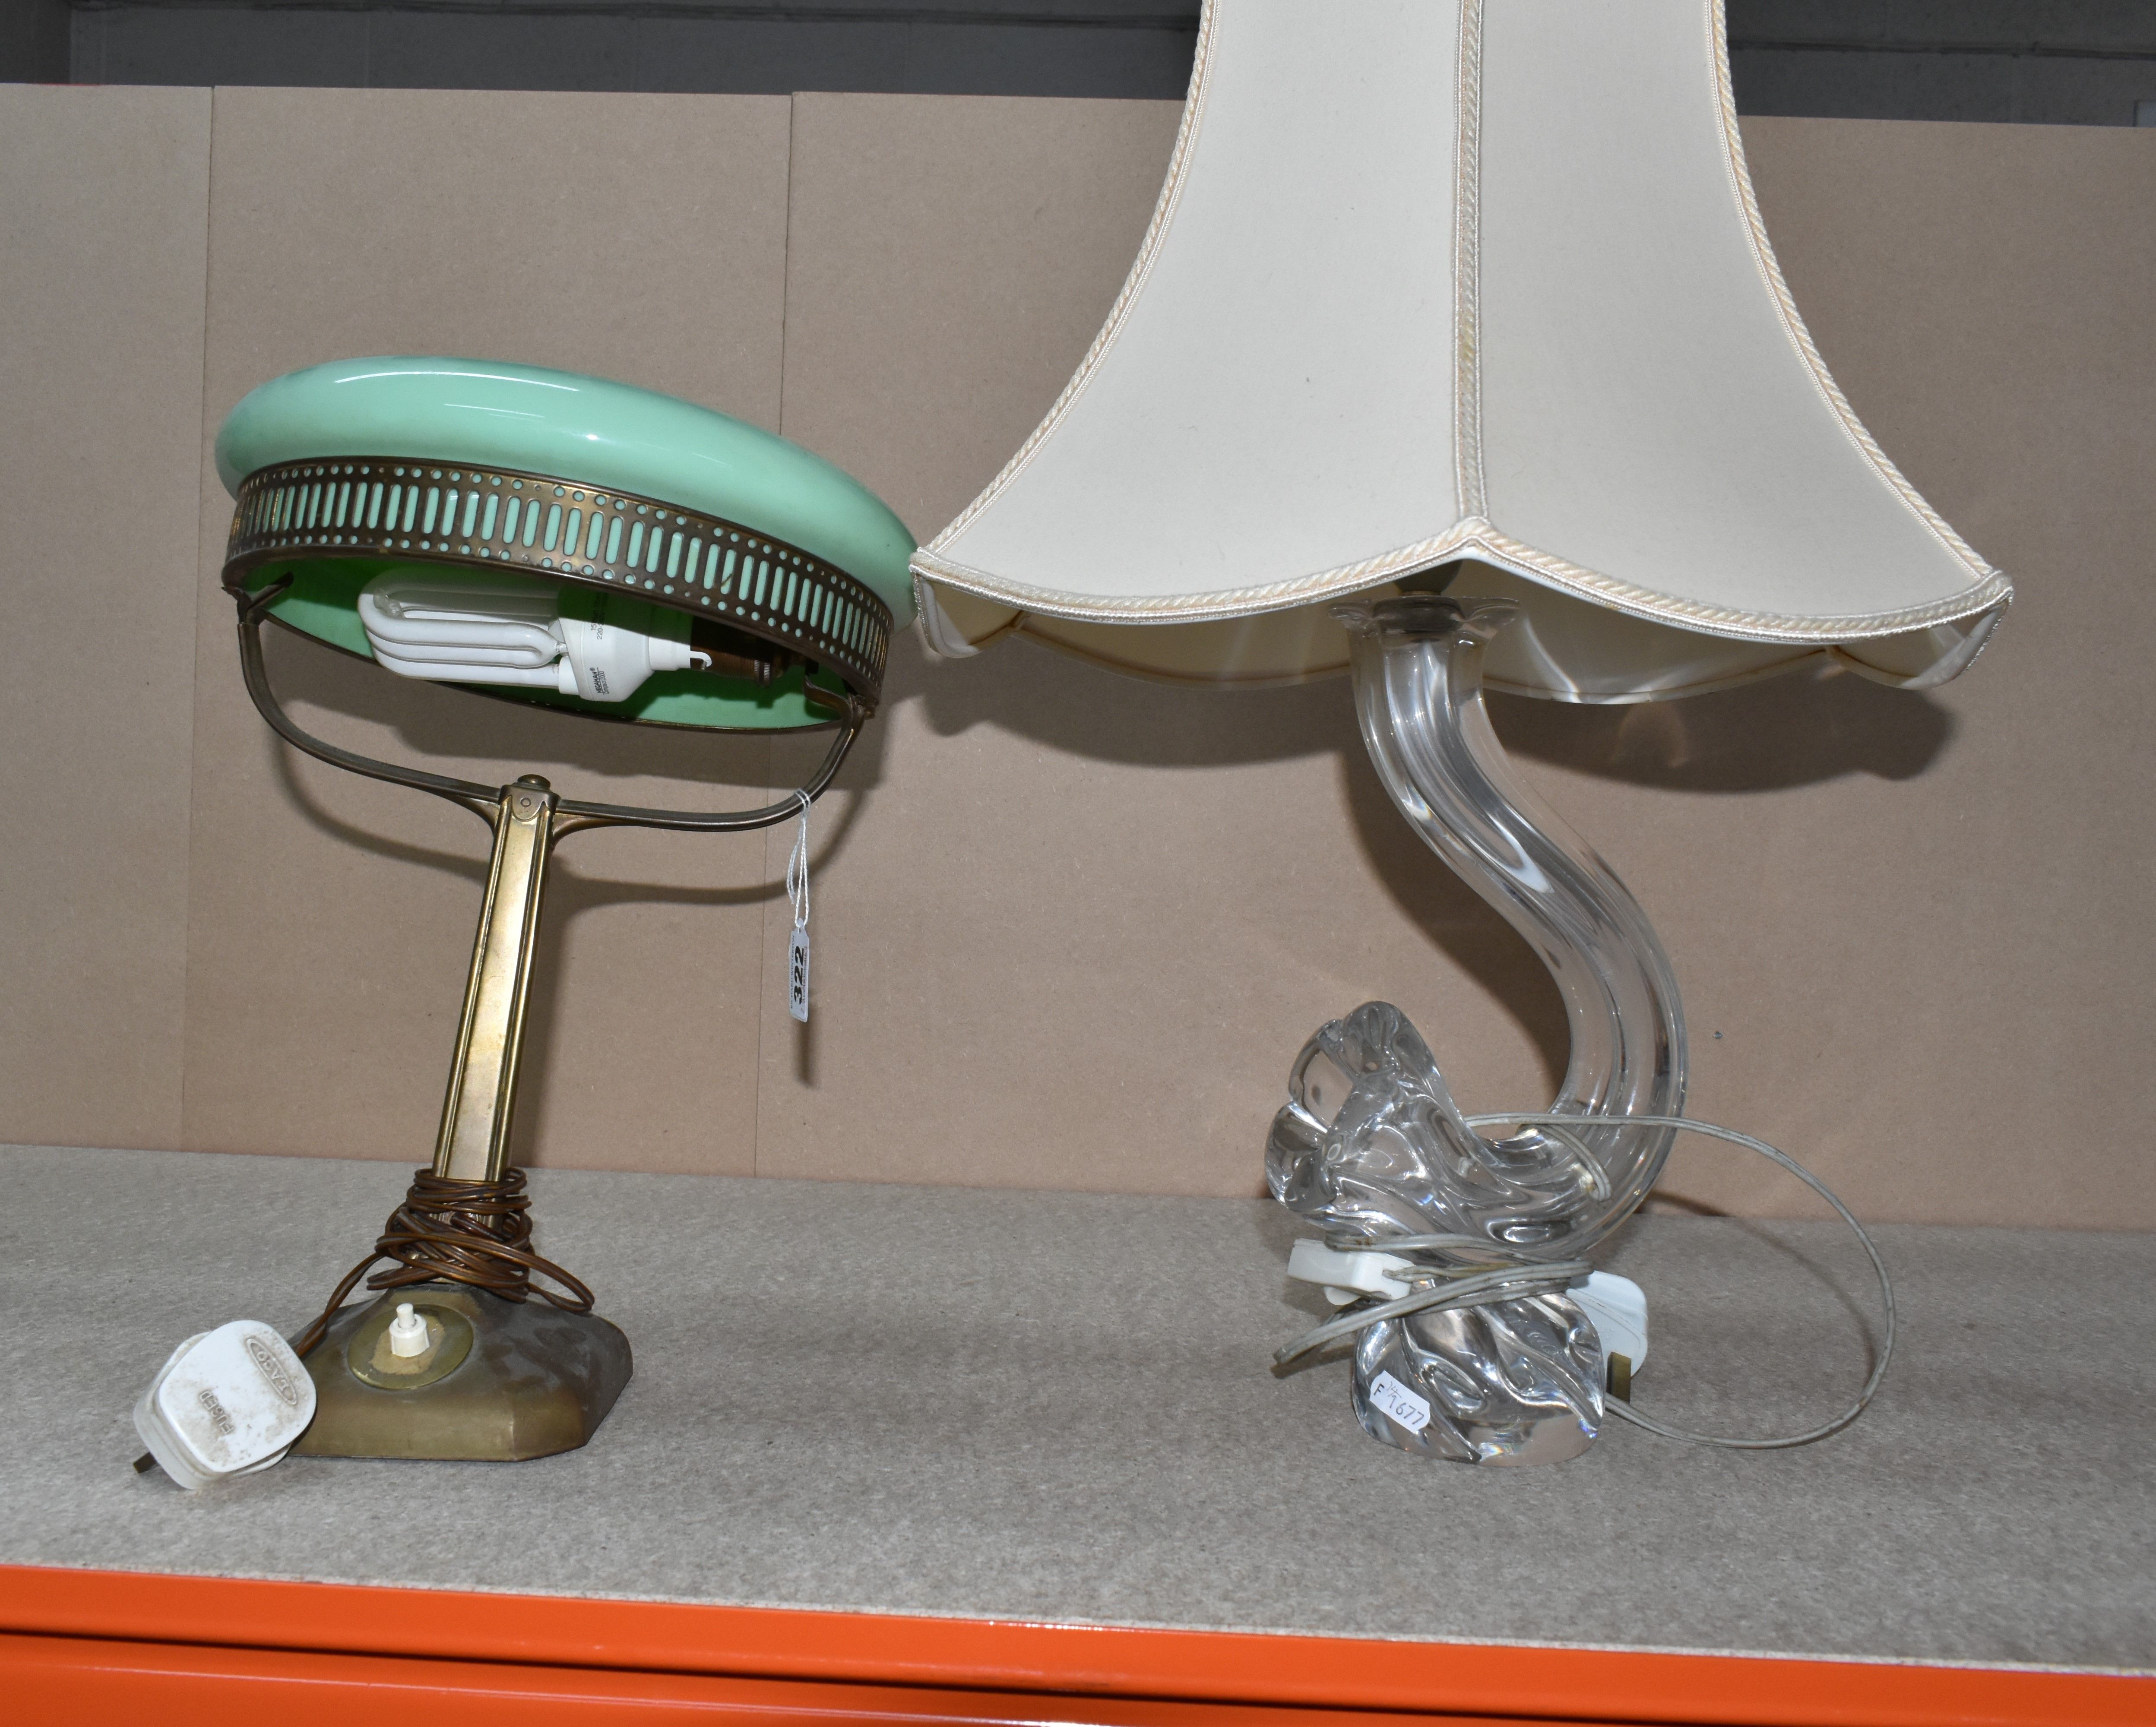 A DAUM FRANCE CRYSTAL GLASS LAMP WITH SHADE, AND AN ART DECO GREEN GLASS AND BRASS DESK LAMP, a